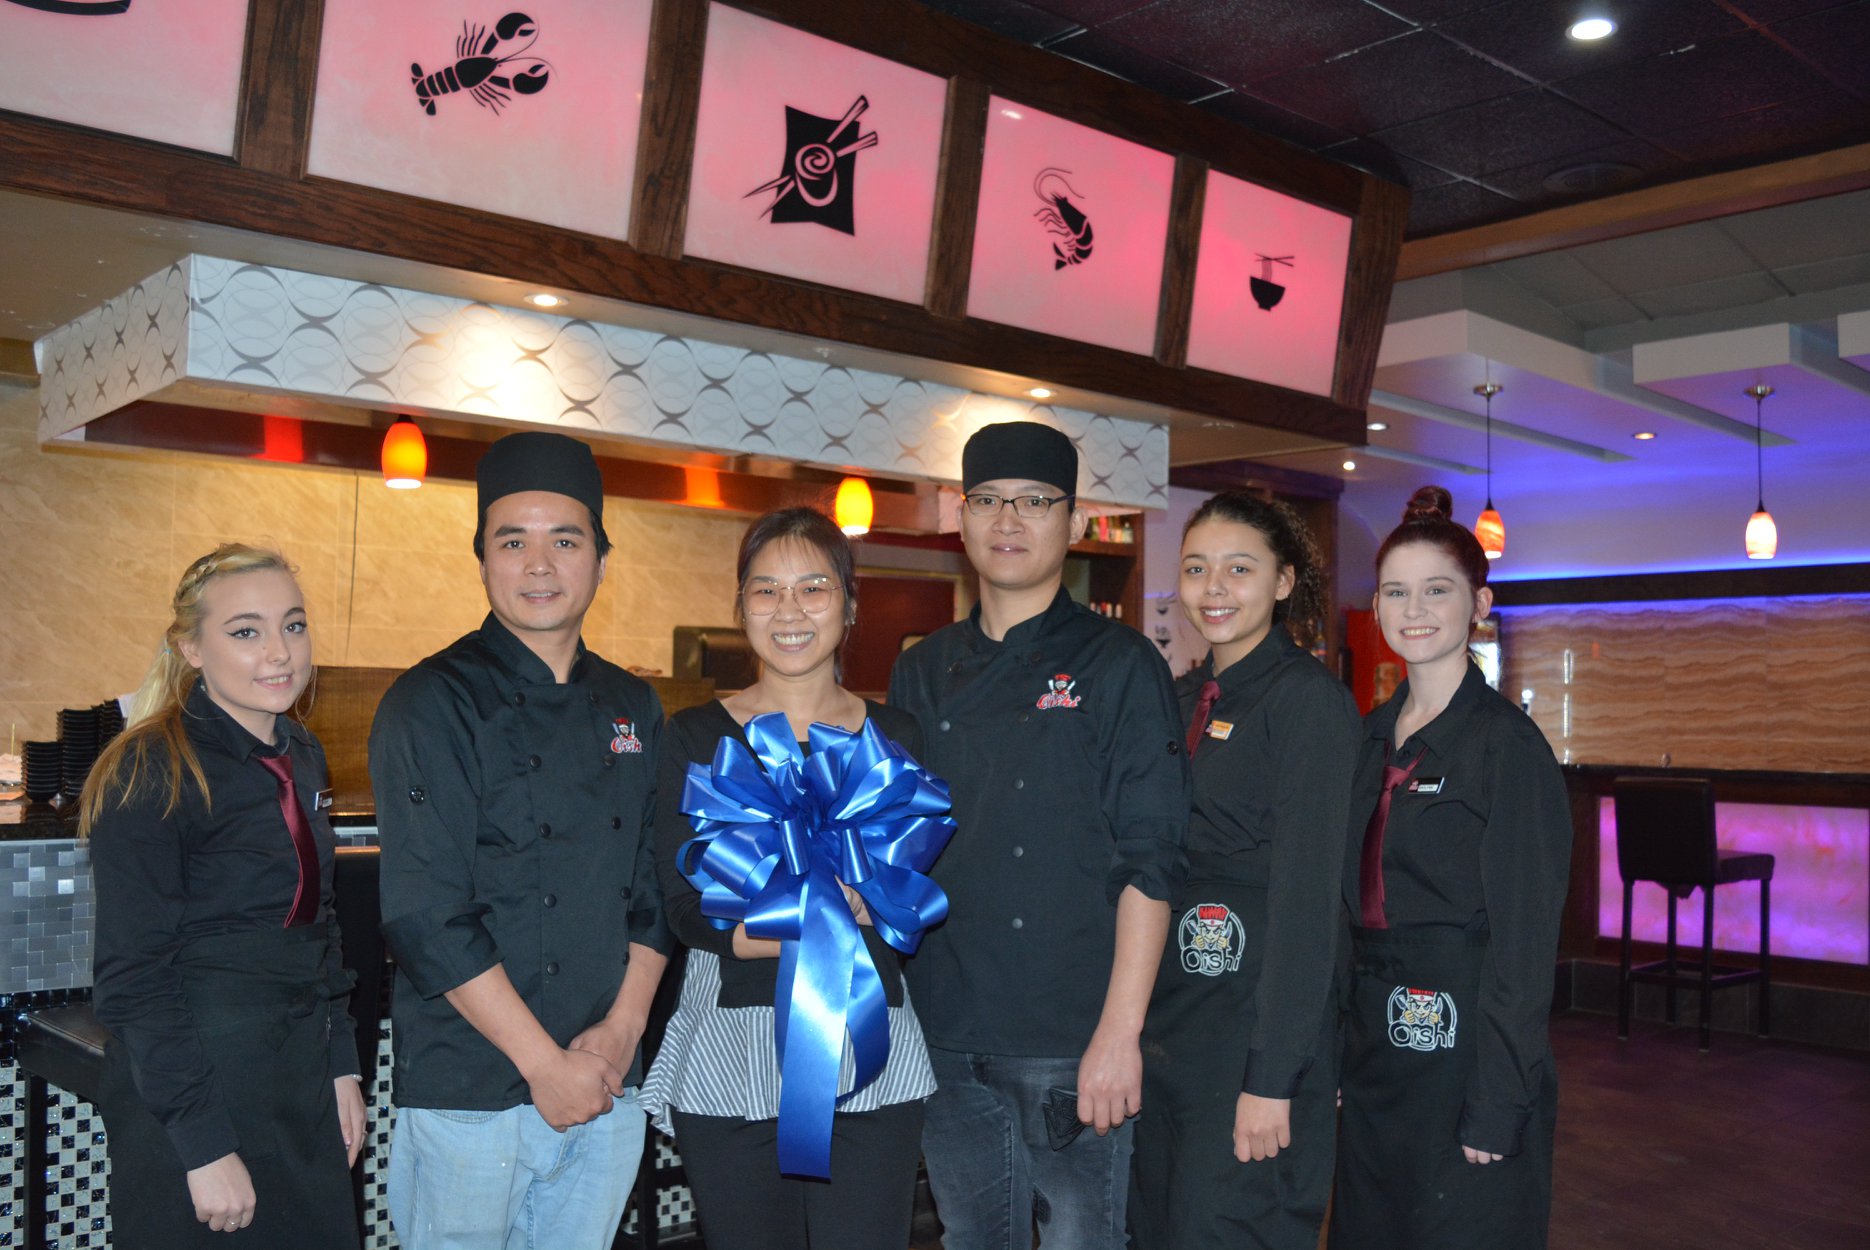 Oishi Asian Restaurant brings Top-Notch Asian Cuisine to the Table